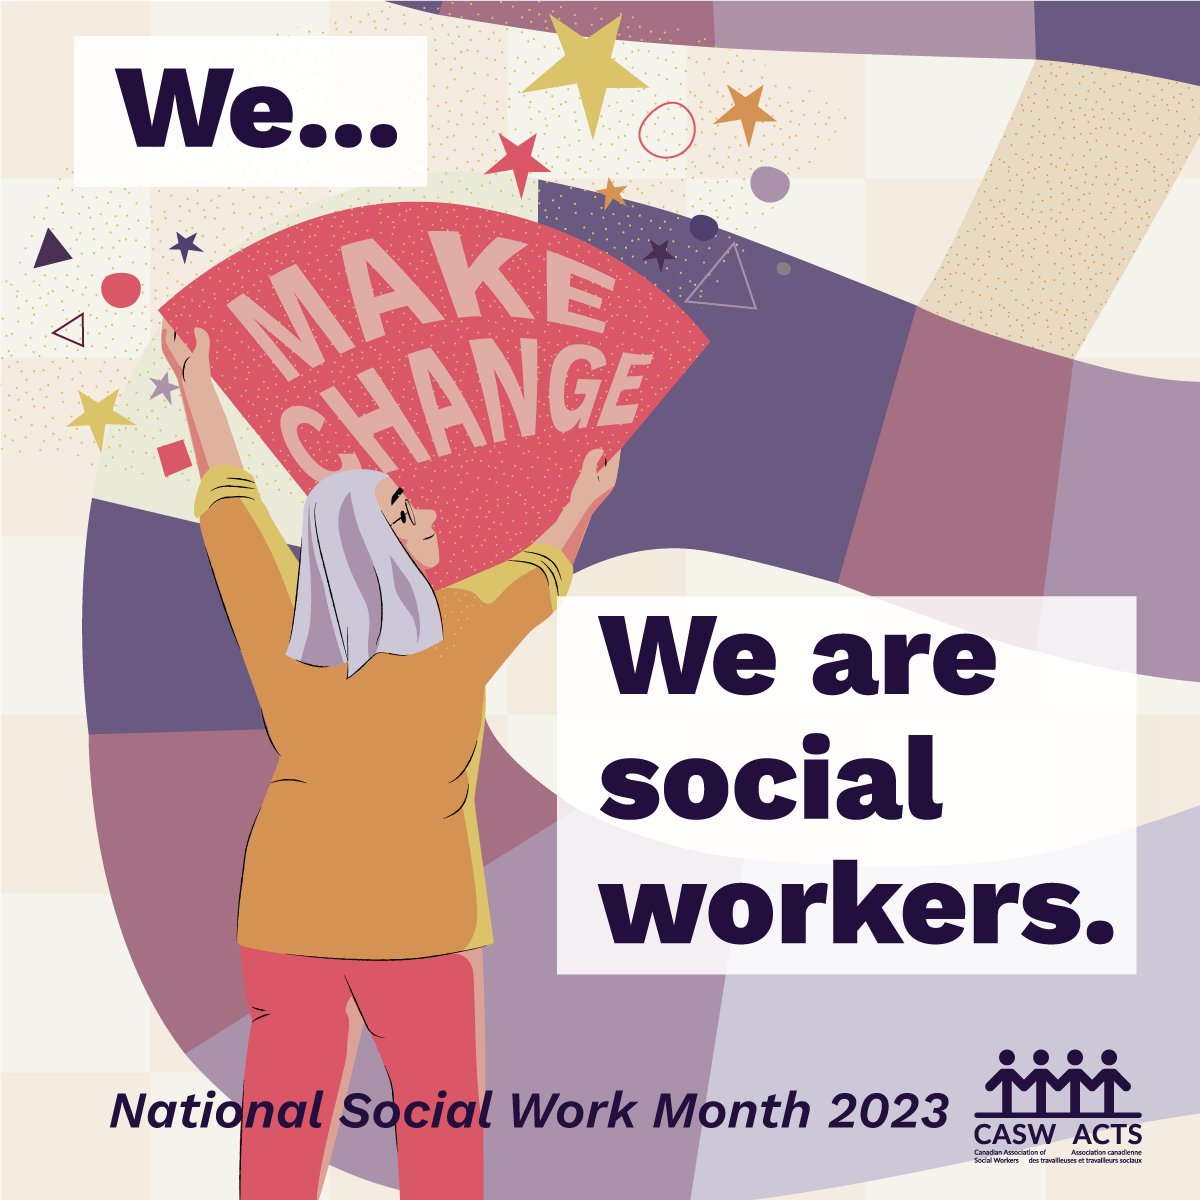 This National Social Work Month, let’s recognize and celebrate the invaluable contributions of social workers in supporting health, mental health and well-being across complex systems and settings. #SocialWorkIsEssential